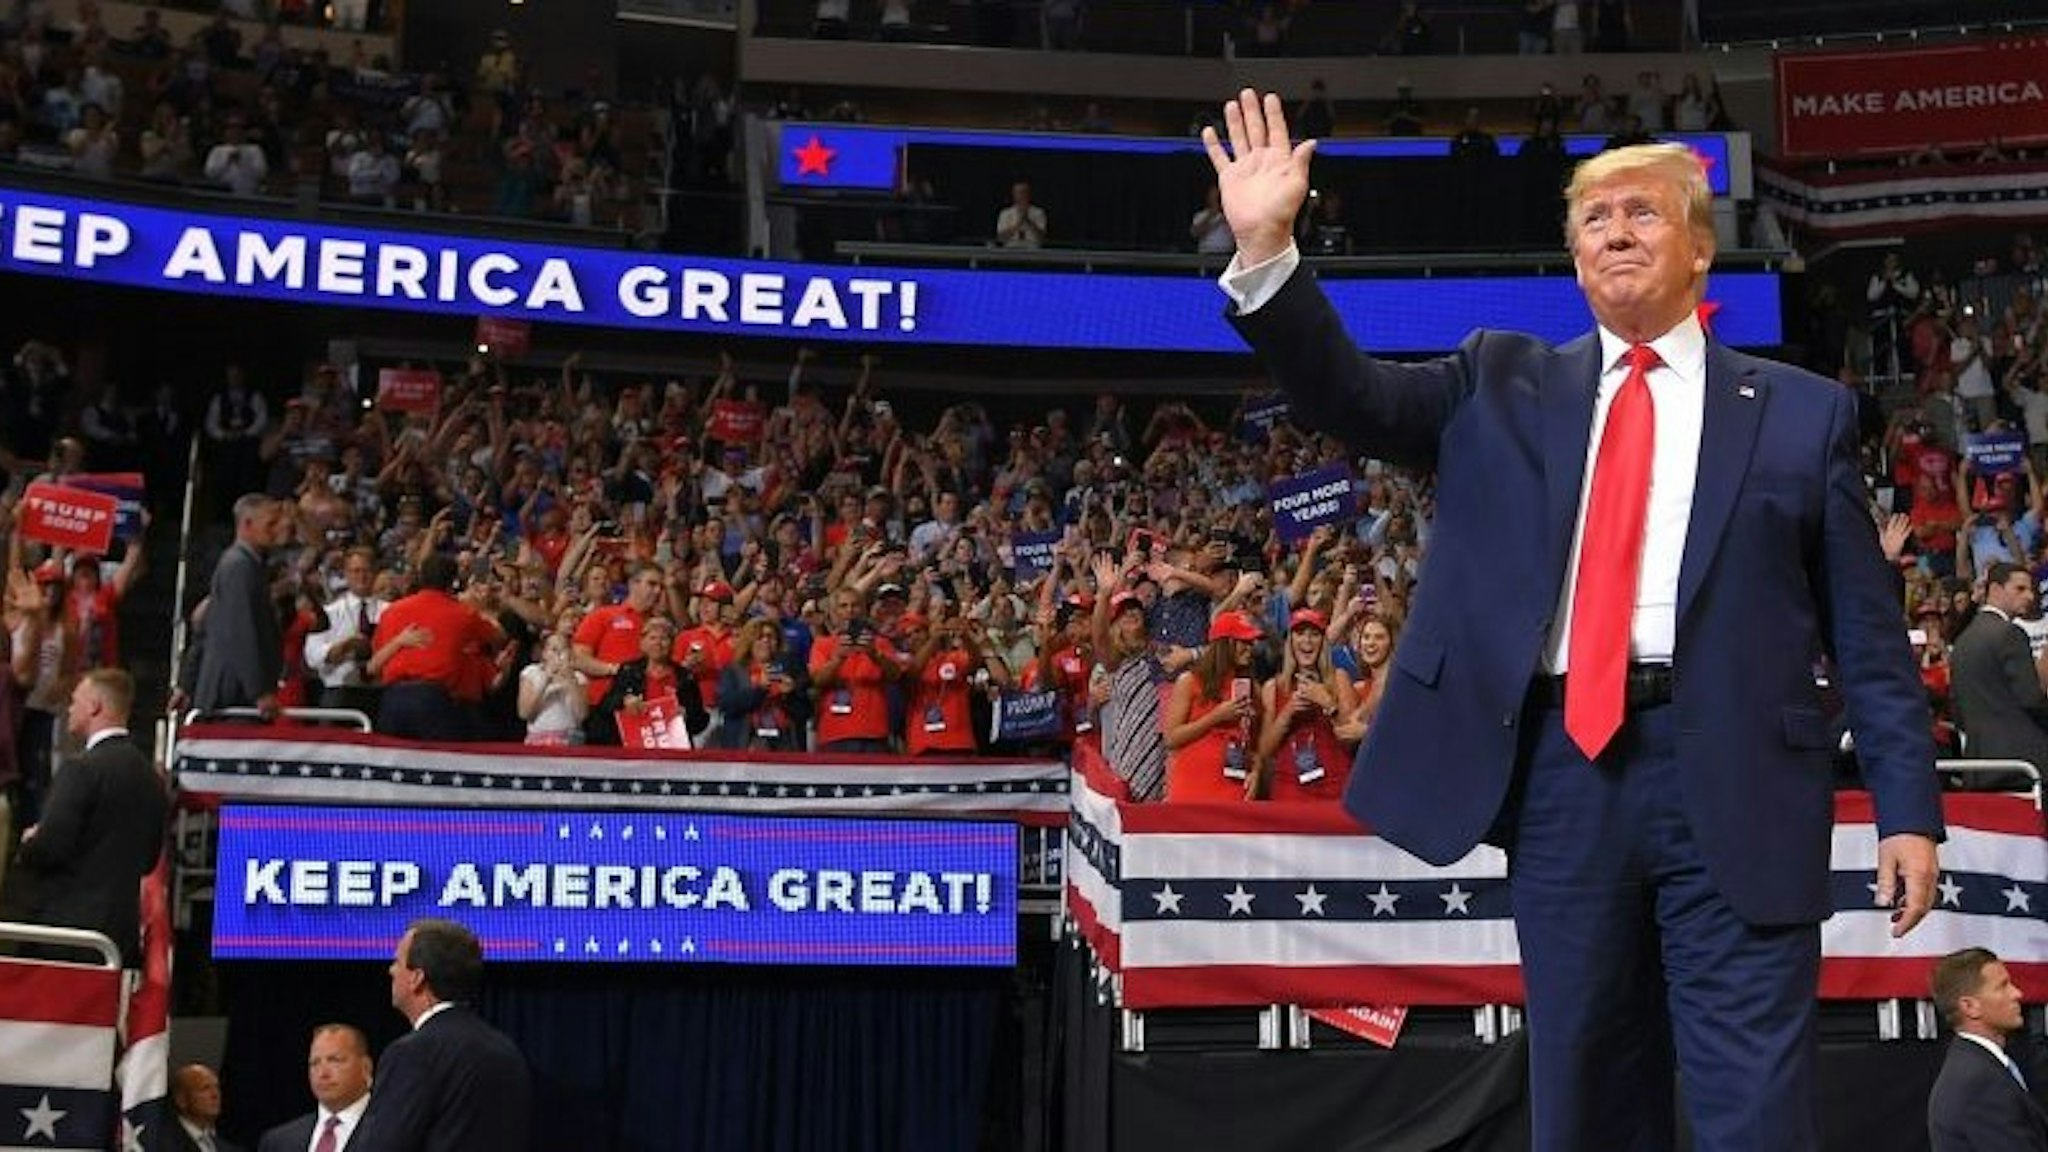 TOPSHOT - US President Donald Trump arrives to speak during a rally at the Amway Center in Orlando, Florida to officially launch his 2020 campaign on June 18, 2019. - Trump kicks off his reelection campaign at what promised to be a rollicking evening rally in Orlando. (Photo by MANDEL NGAN / AFP) (Photo by